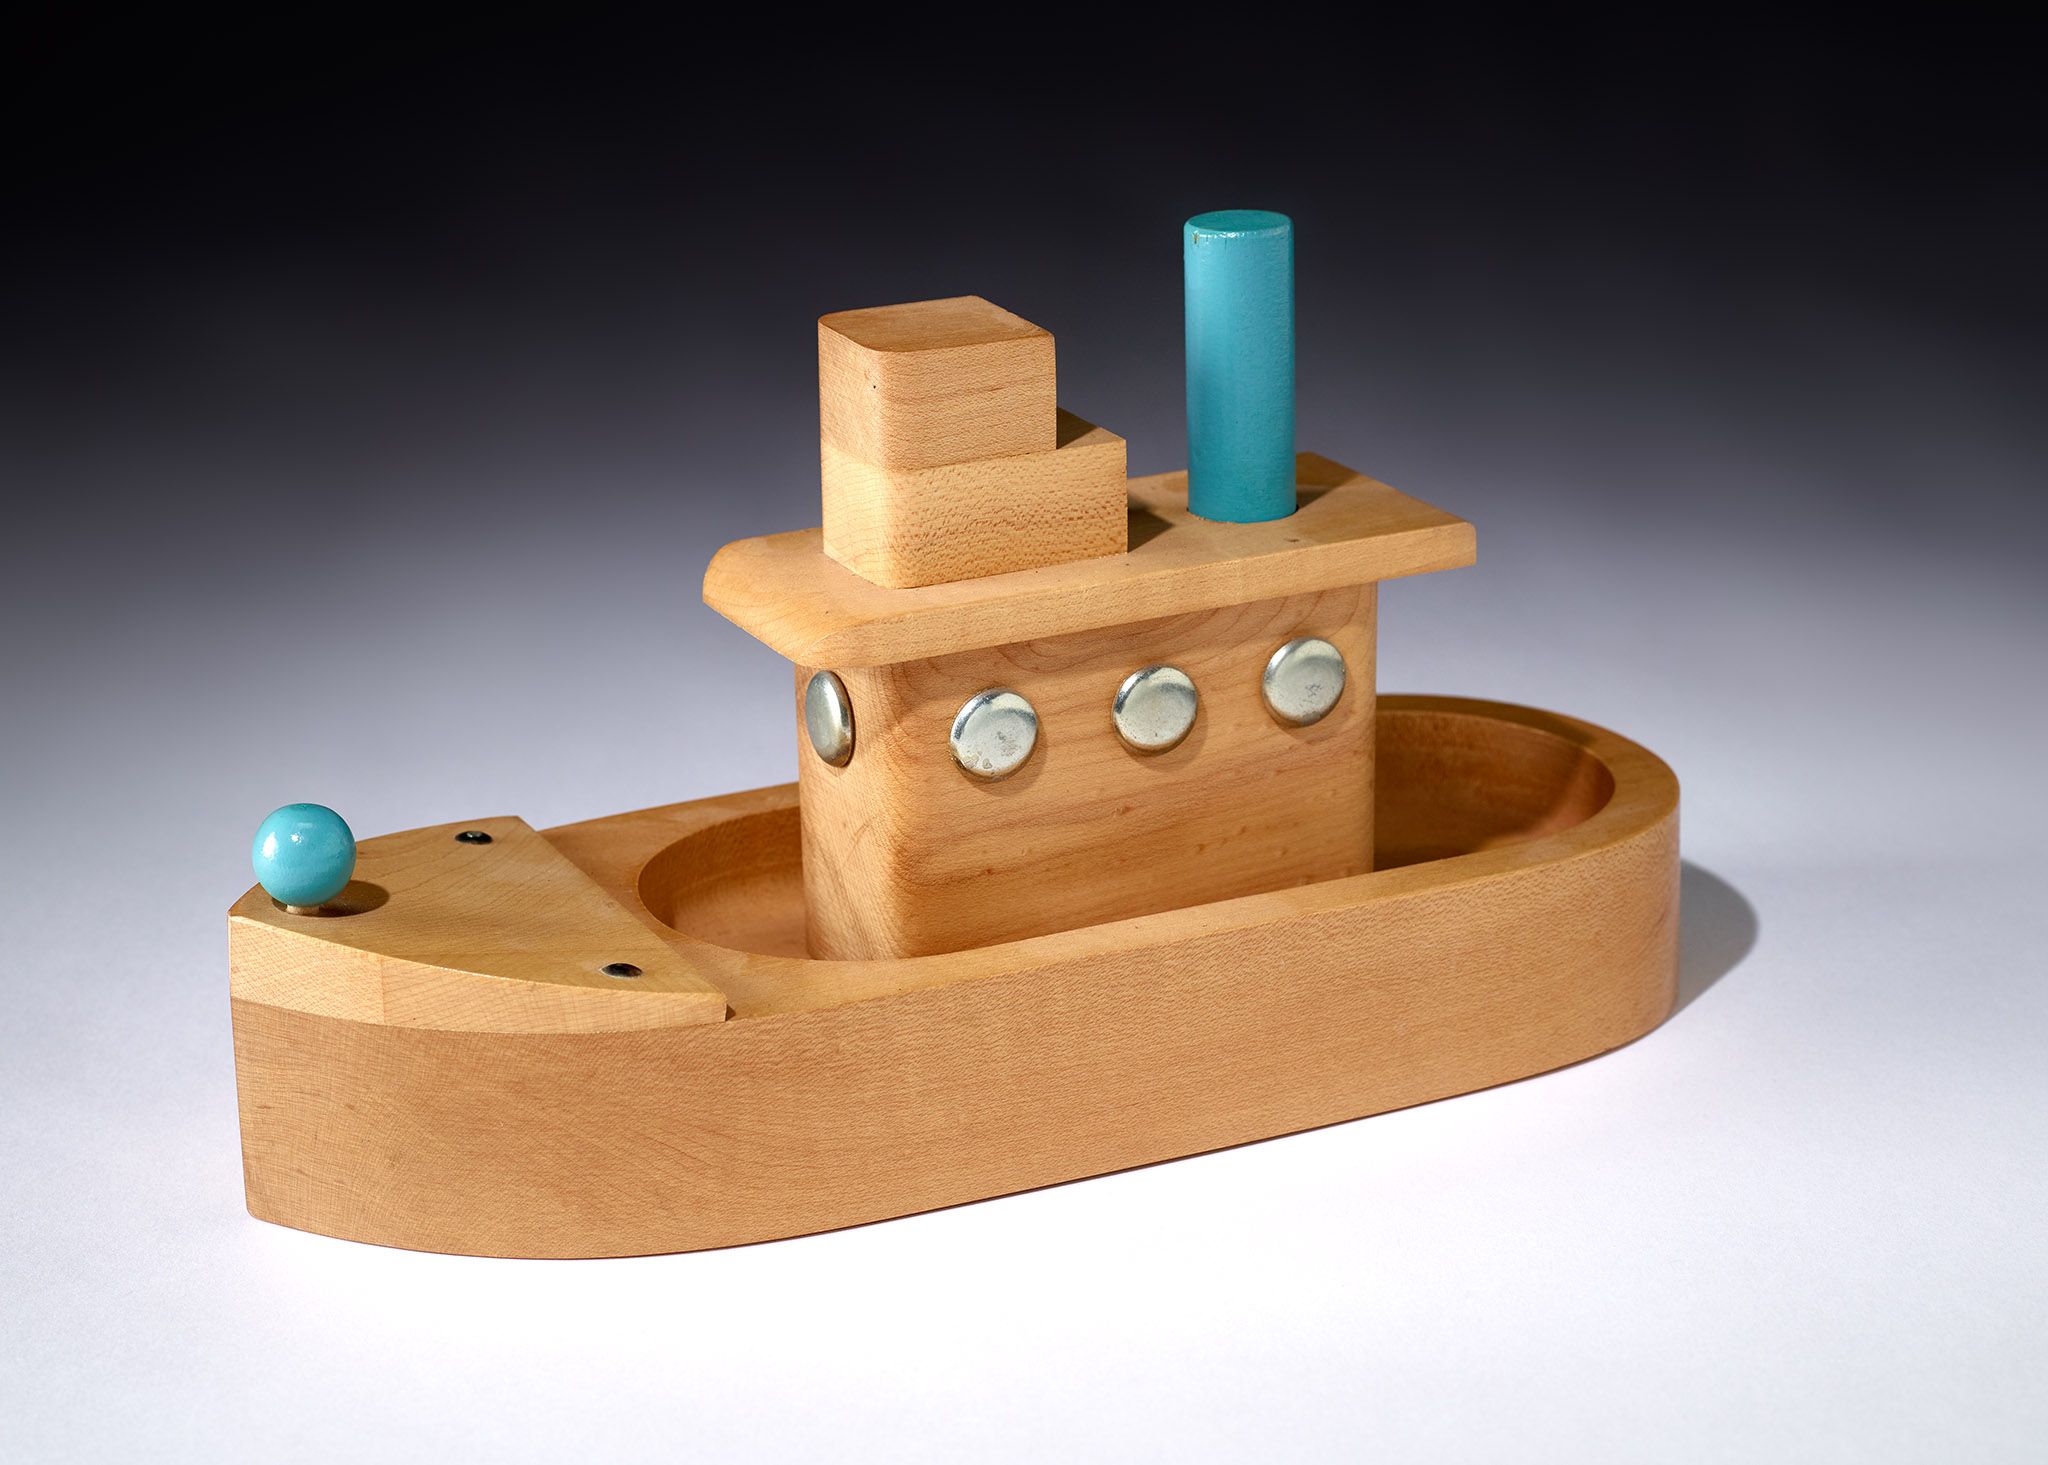 One of the many nautical toys on display in the Toys Ahoy exhibit.